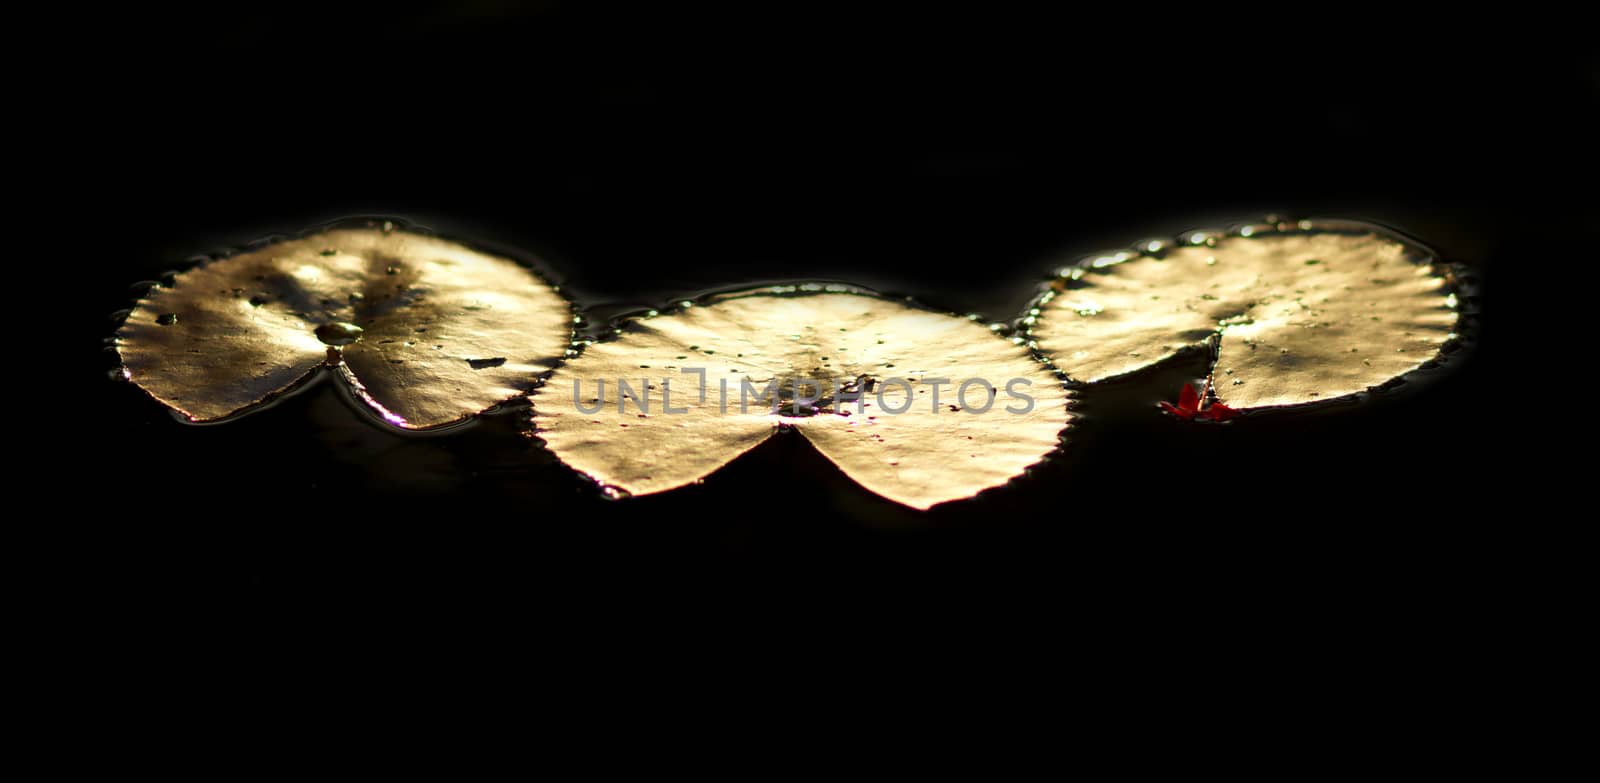 Reflection of the sunset on Lotus leaf by Noppharat_th